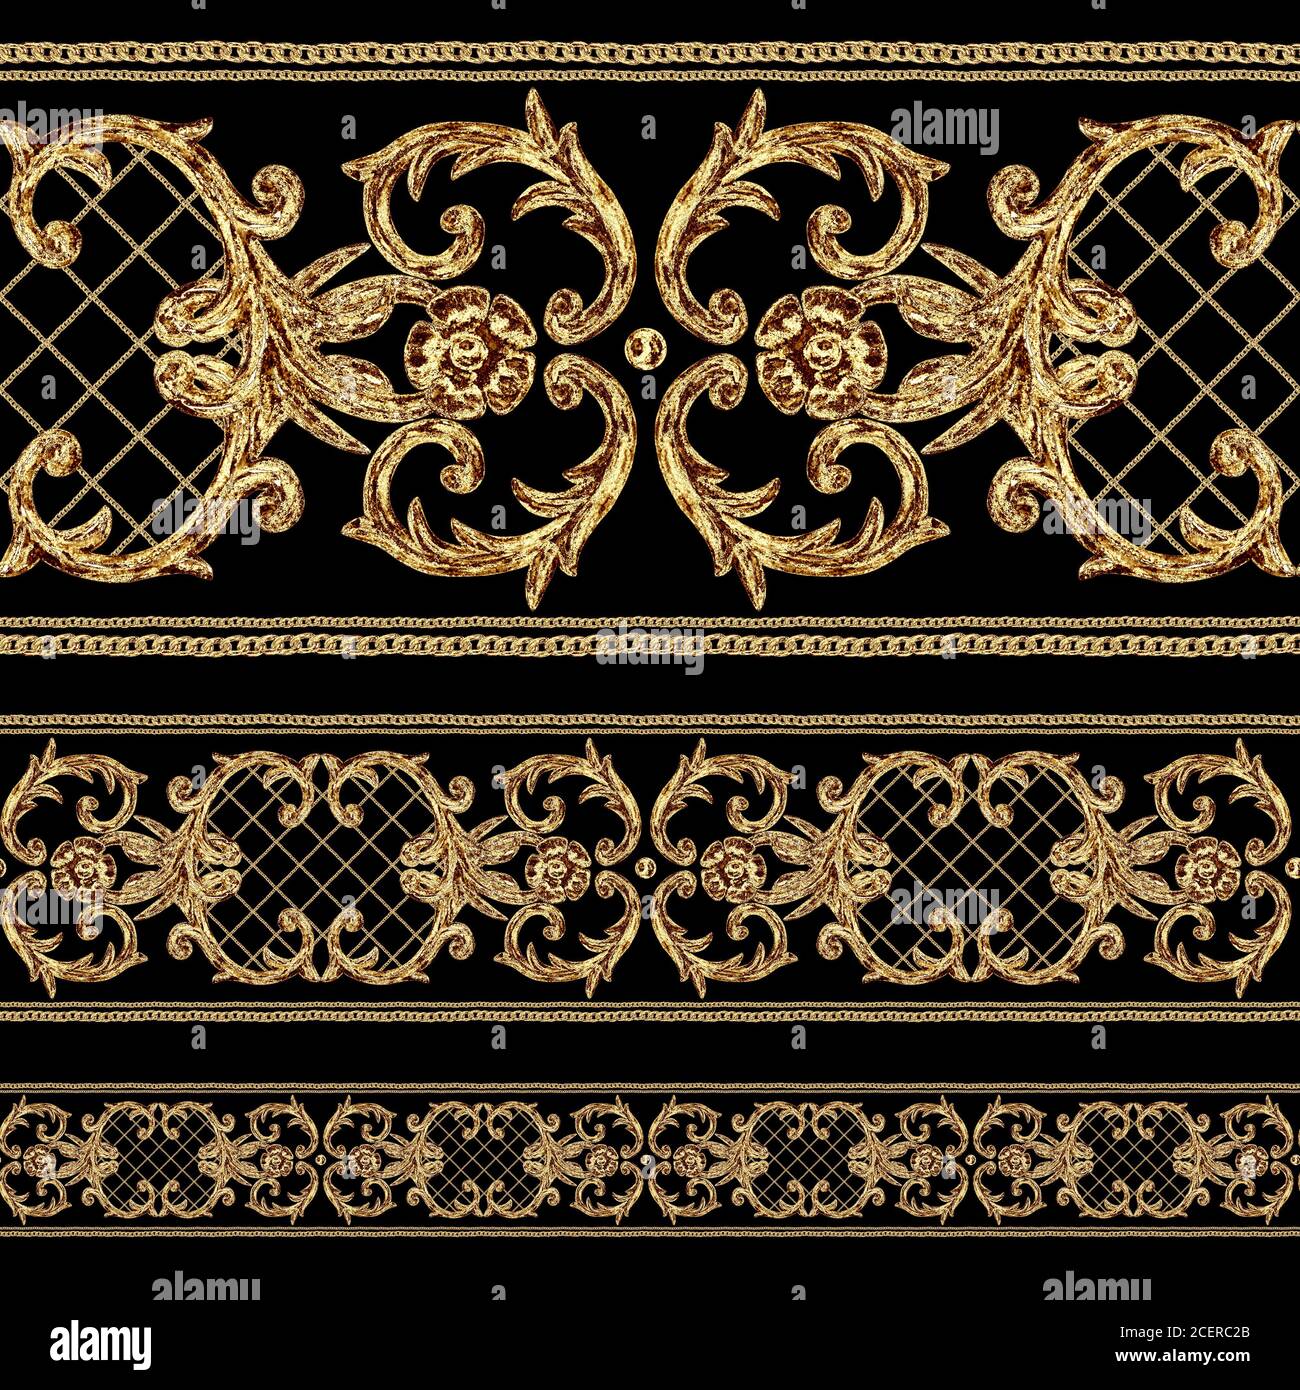 Baroque style golden ornamental segments seamless pattern. Watercolor hand drawn gold border frame with scrolls, leaves, chains and elements on black Stock Photo